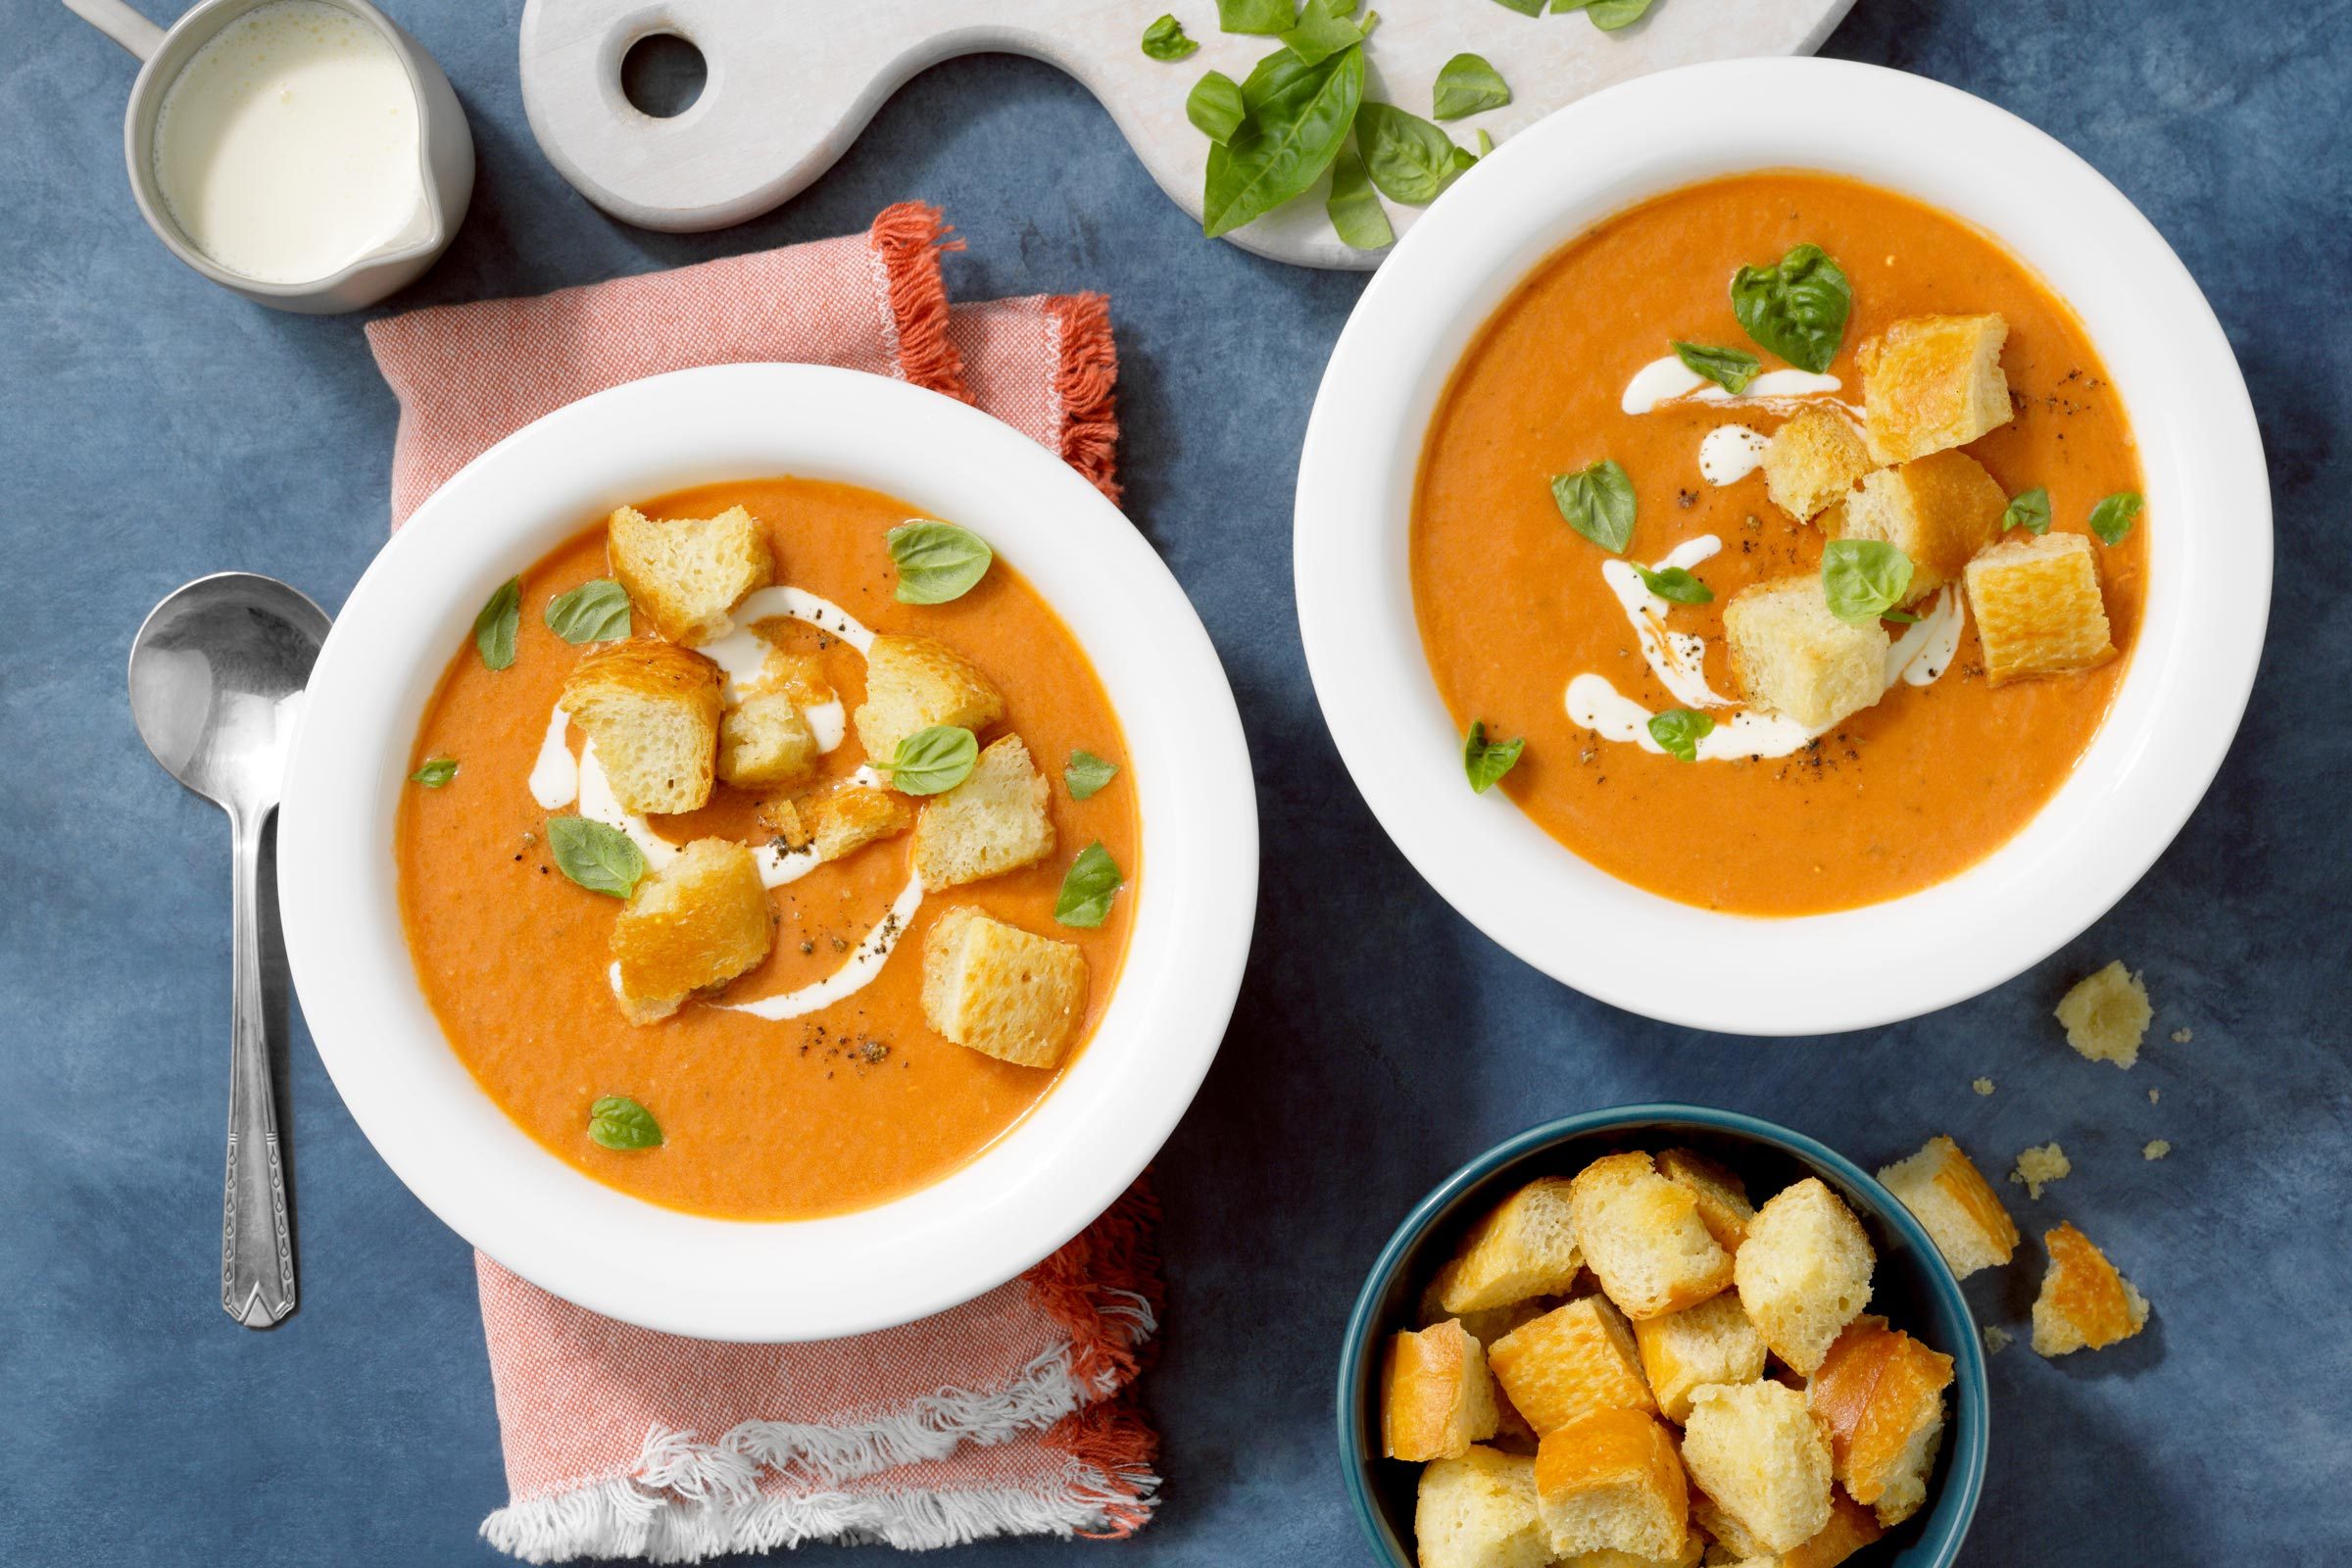 copy cat Panera tomato soup in two bowls topped with croutons